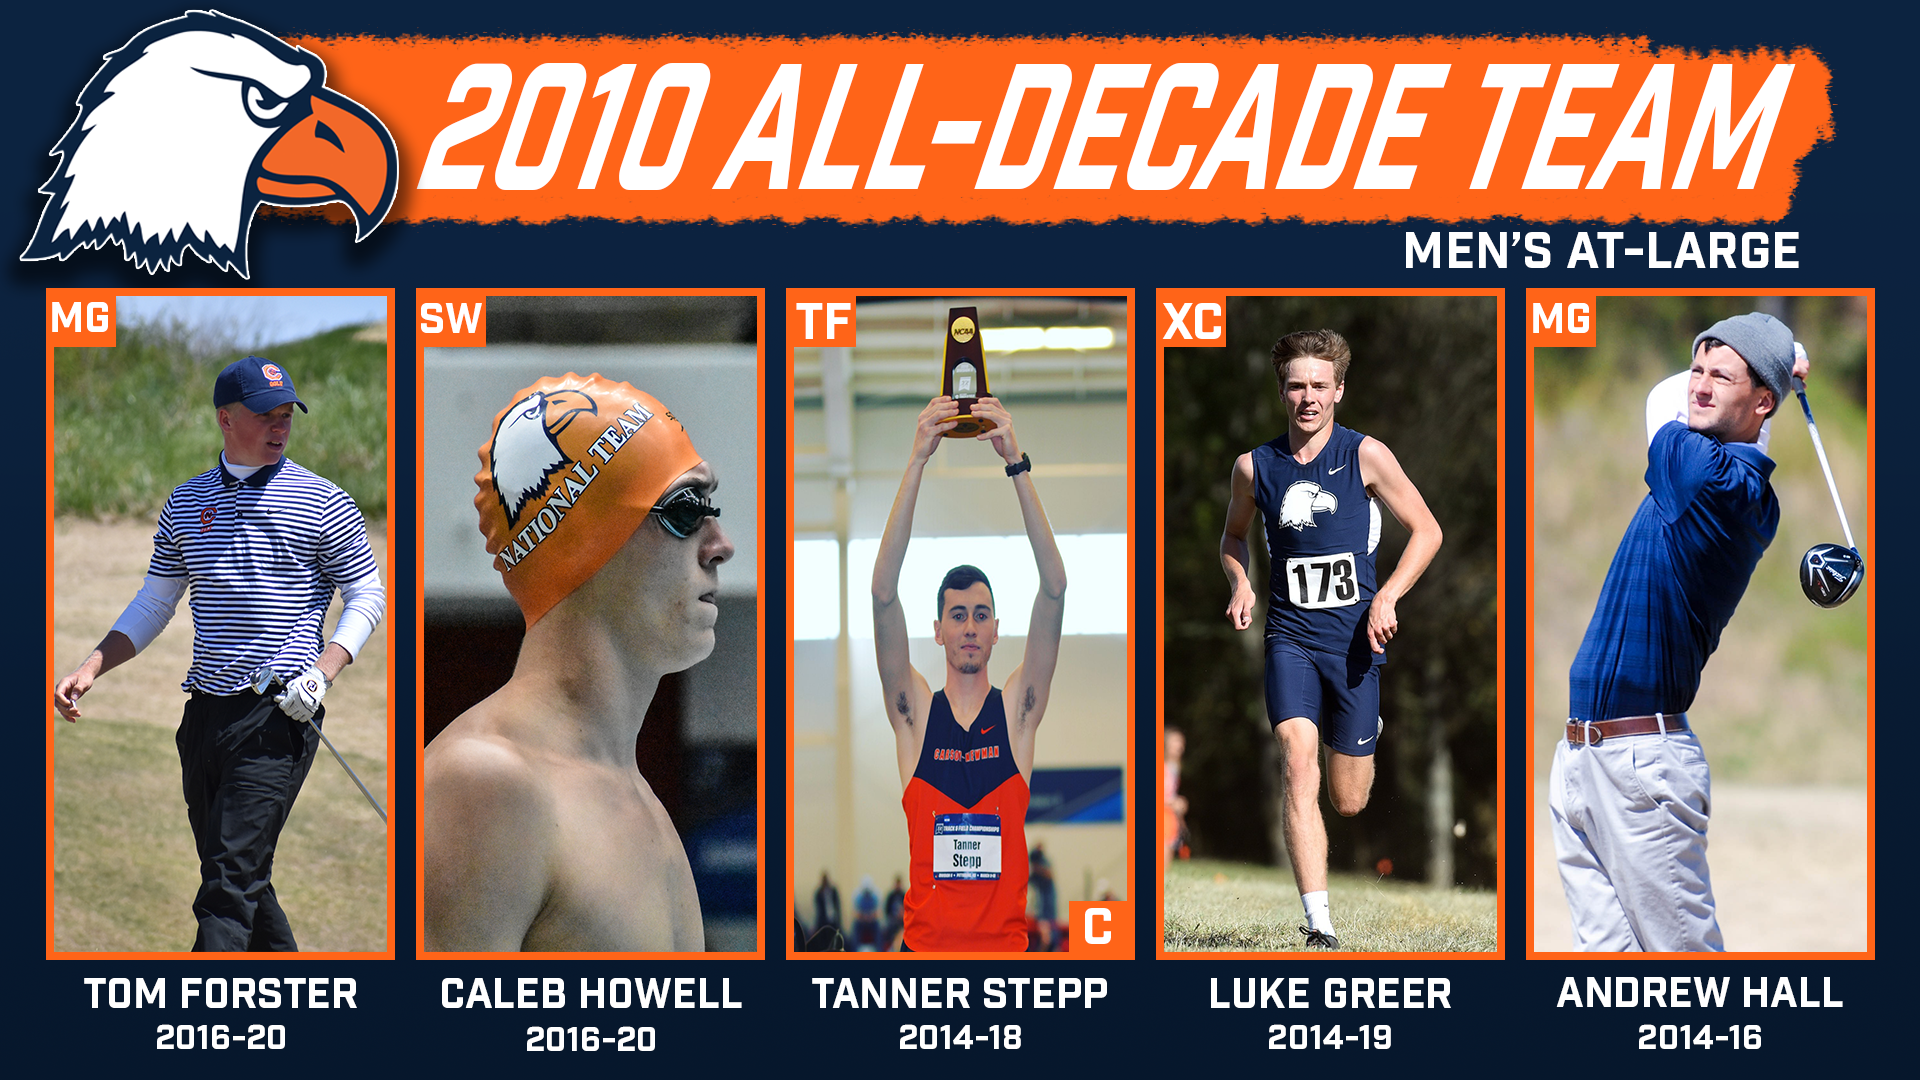 Stepp, Forster and Howell Headline Men’s At-Large All-Decade Team